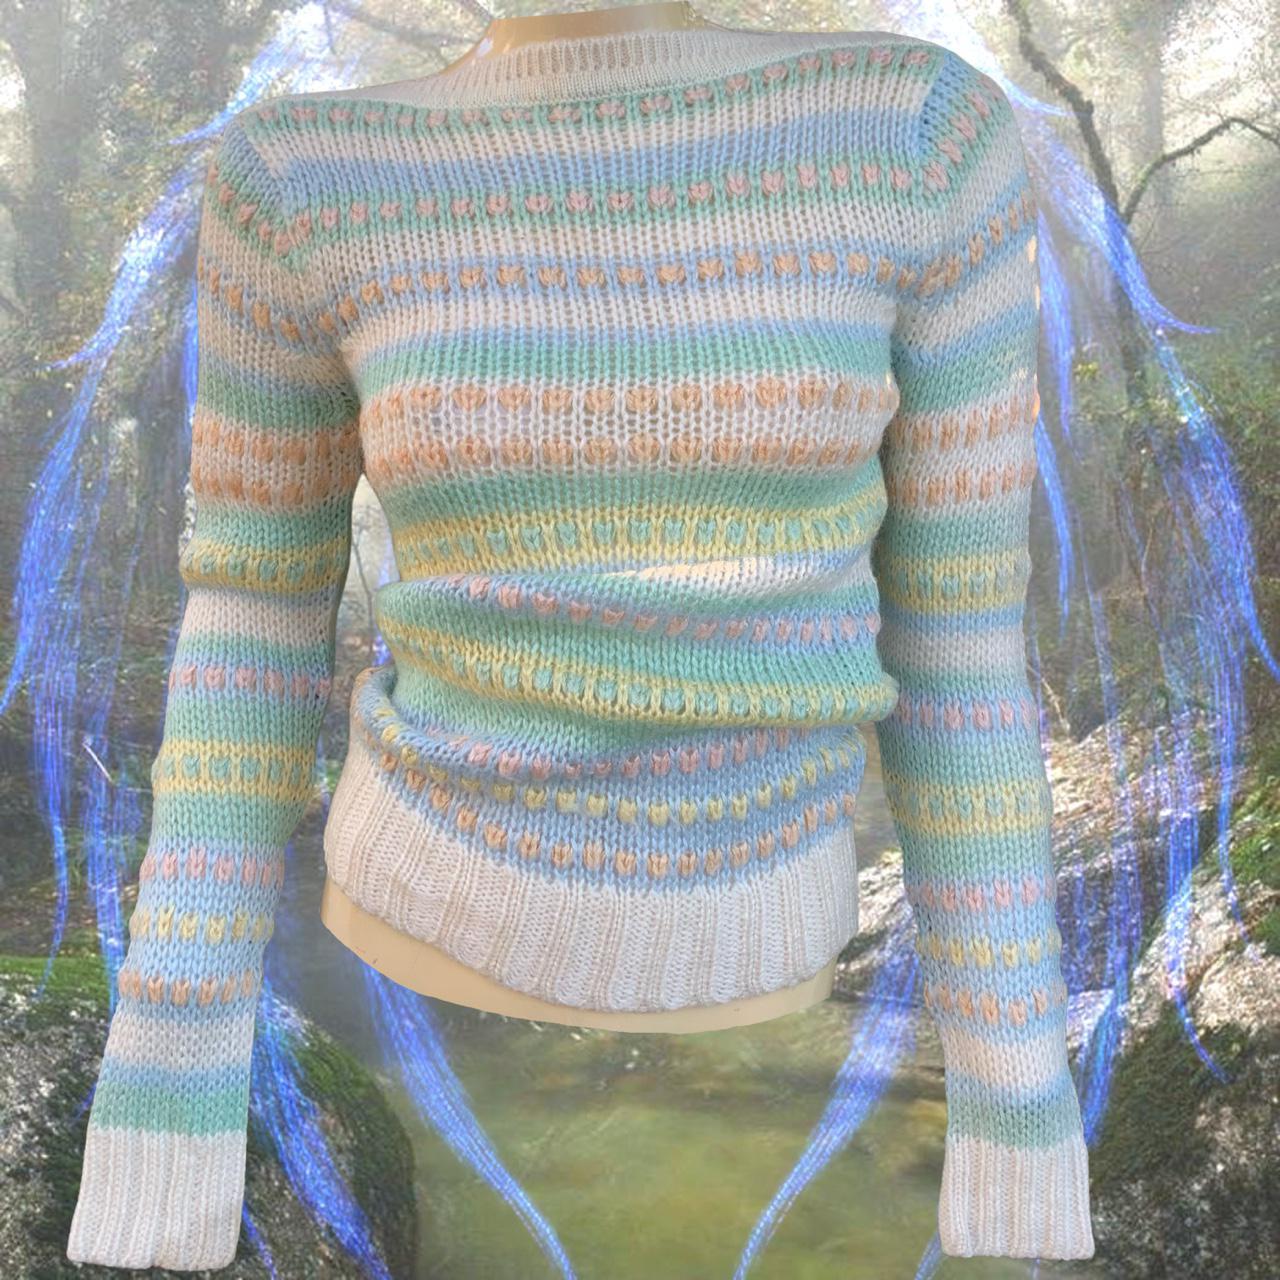 Product Image 1 - 🕷🕷Vintage Pastel Knit Sweater🕷🕷
•Good Condition